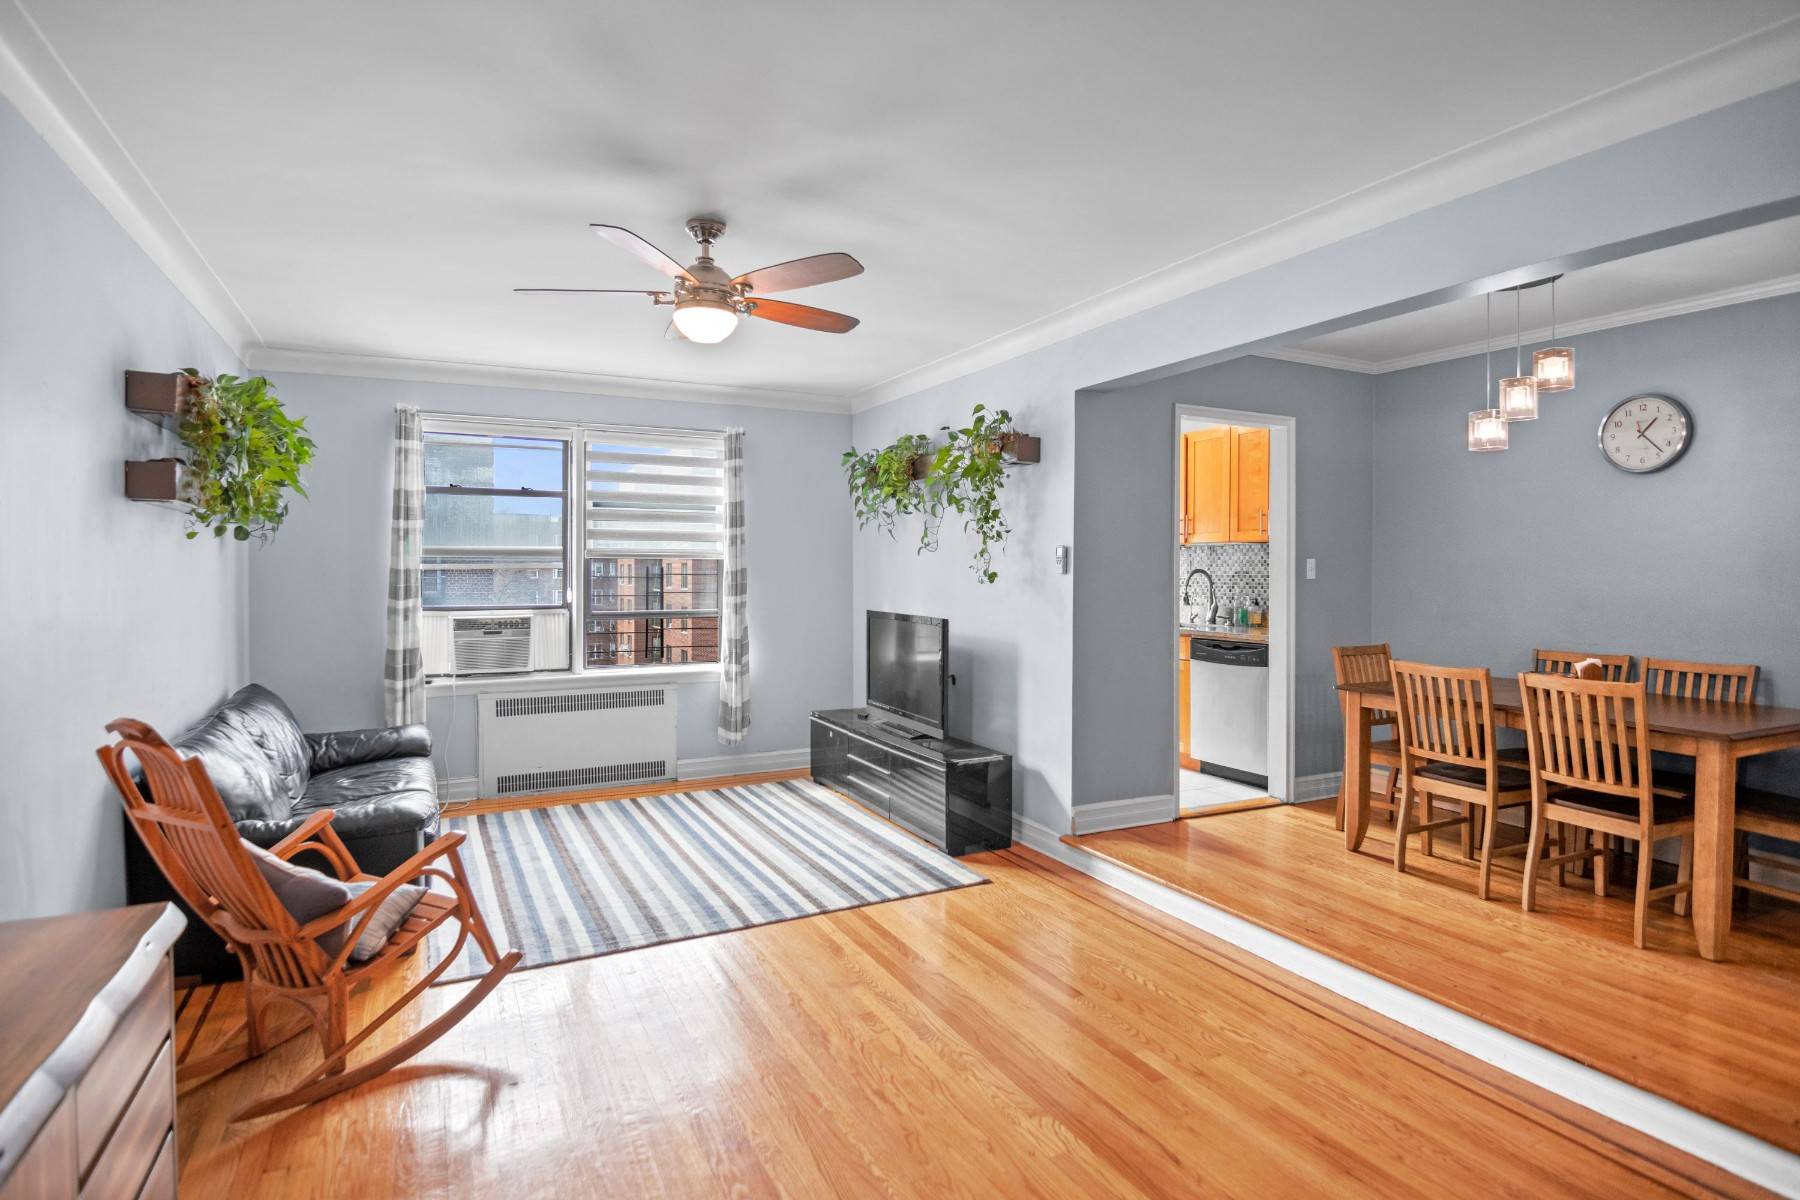 Step into this immaculate 2 bedroom, 1 bathroom Montclair Gardens Co op in the heart of Jackson Heights.